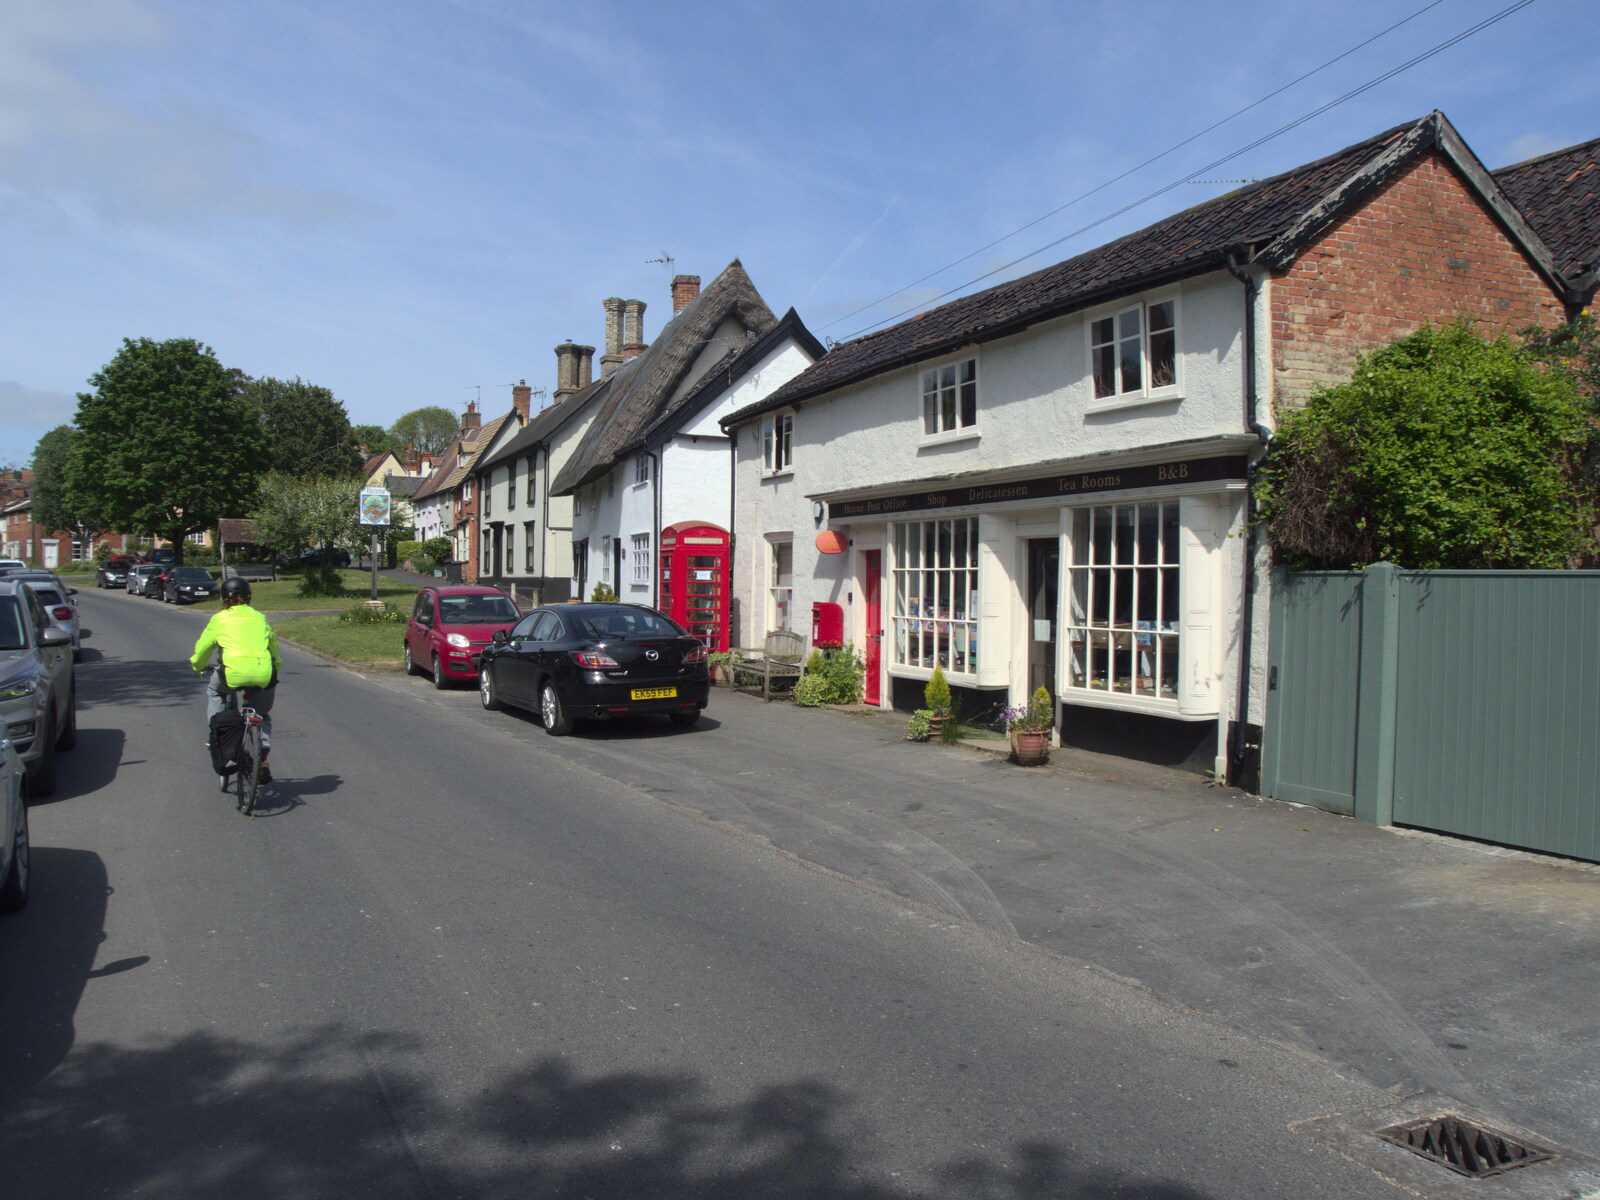 Isobel cycles up Low Street in Hoxne from A Quest for the Fabled Swimming Spot, Hoxne, Suffolk - 29th May 2023